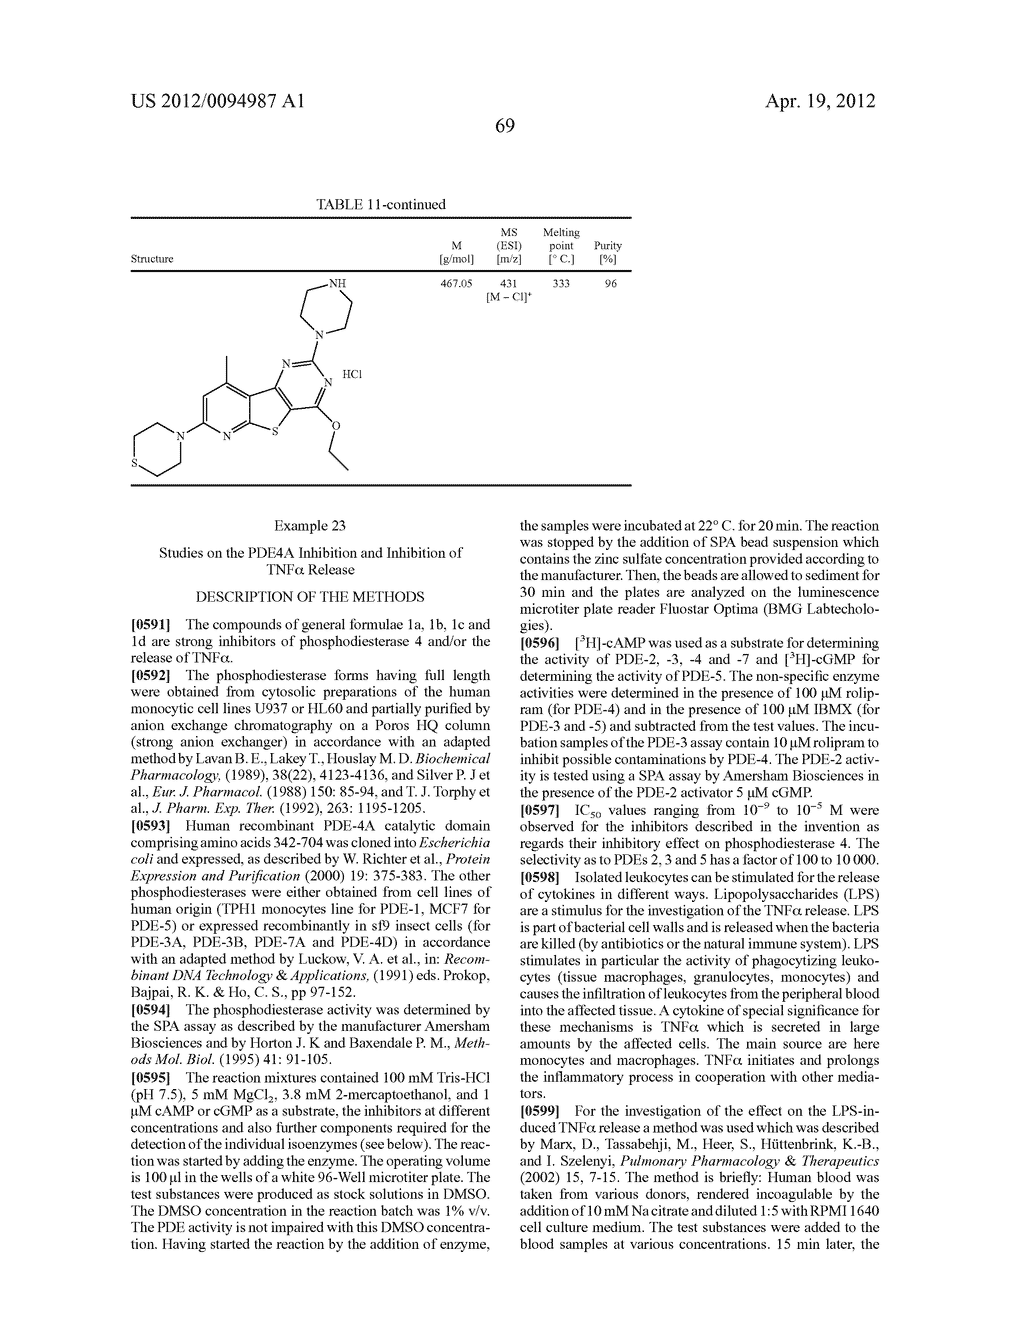 SUBSTITUTED PYRIDO [3', 2': 4, 5] THIENO [3, 2-D] PYRIMIDINES AND PYRIDO     [3', 2': 4, 5] FURO [3, 2-D] PYRIMIDINES USED AS INHIBITORS OF THE PDE-4     AND/OR THE RELEASE OF TNF-alpha - diagram, schematic, and image 71